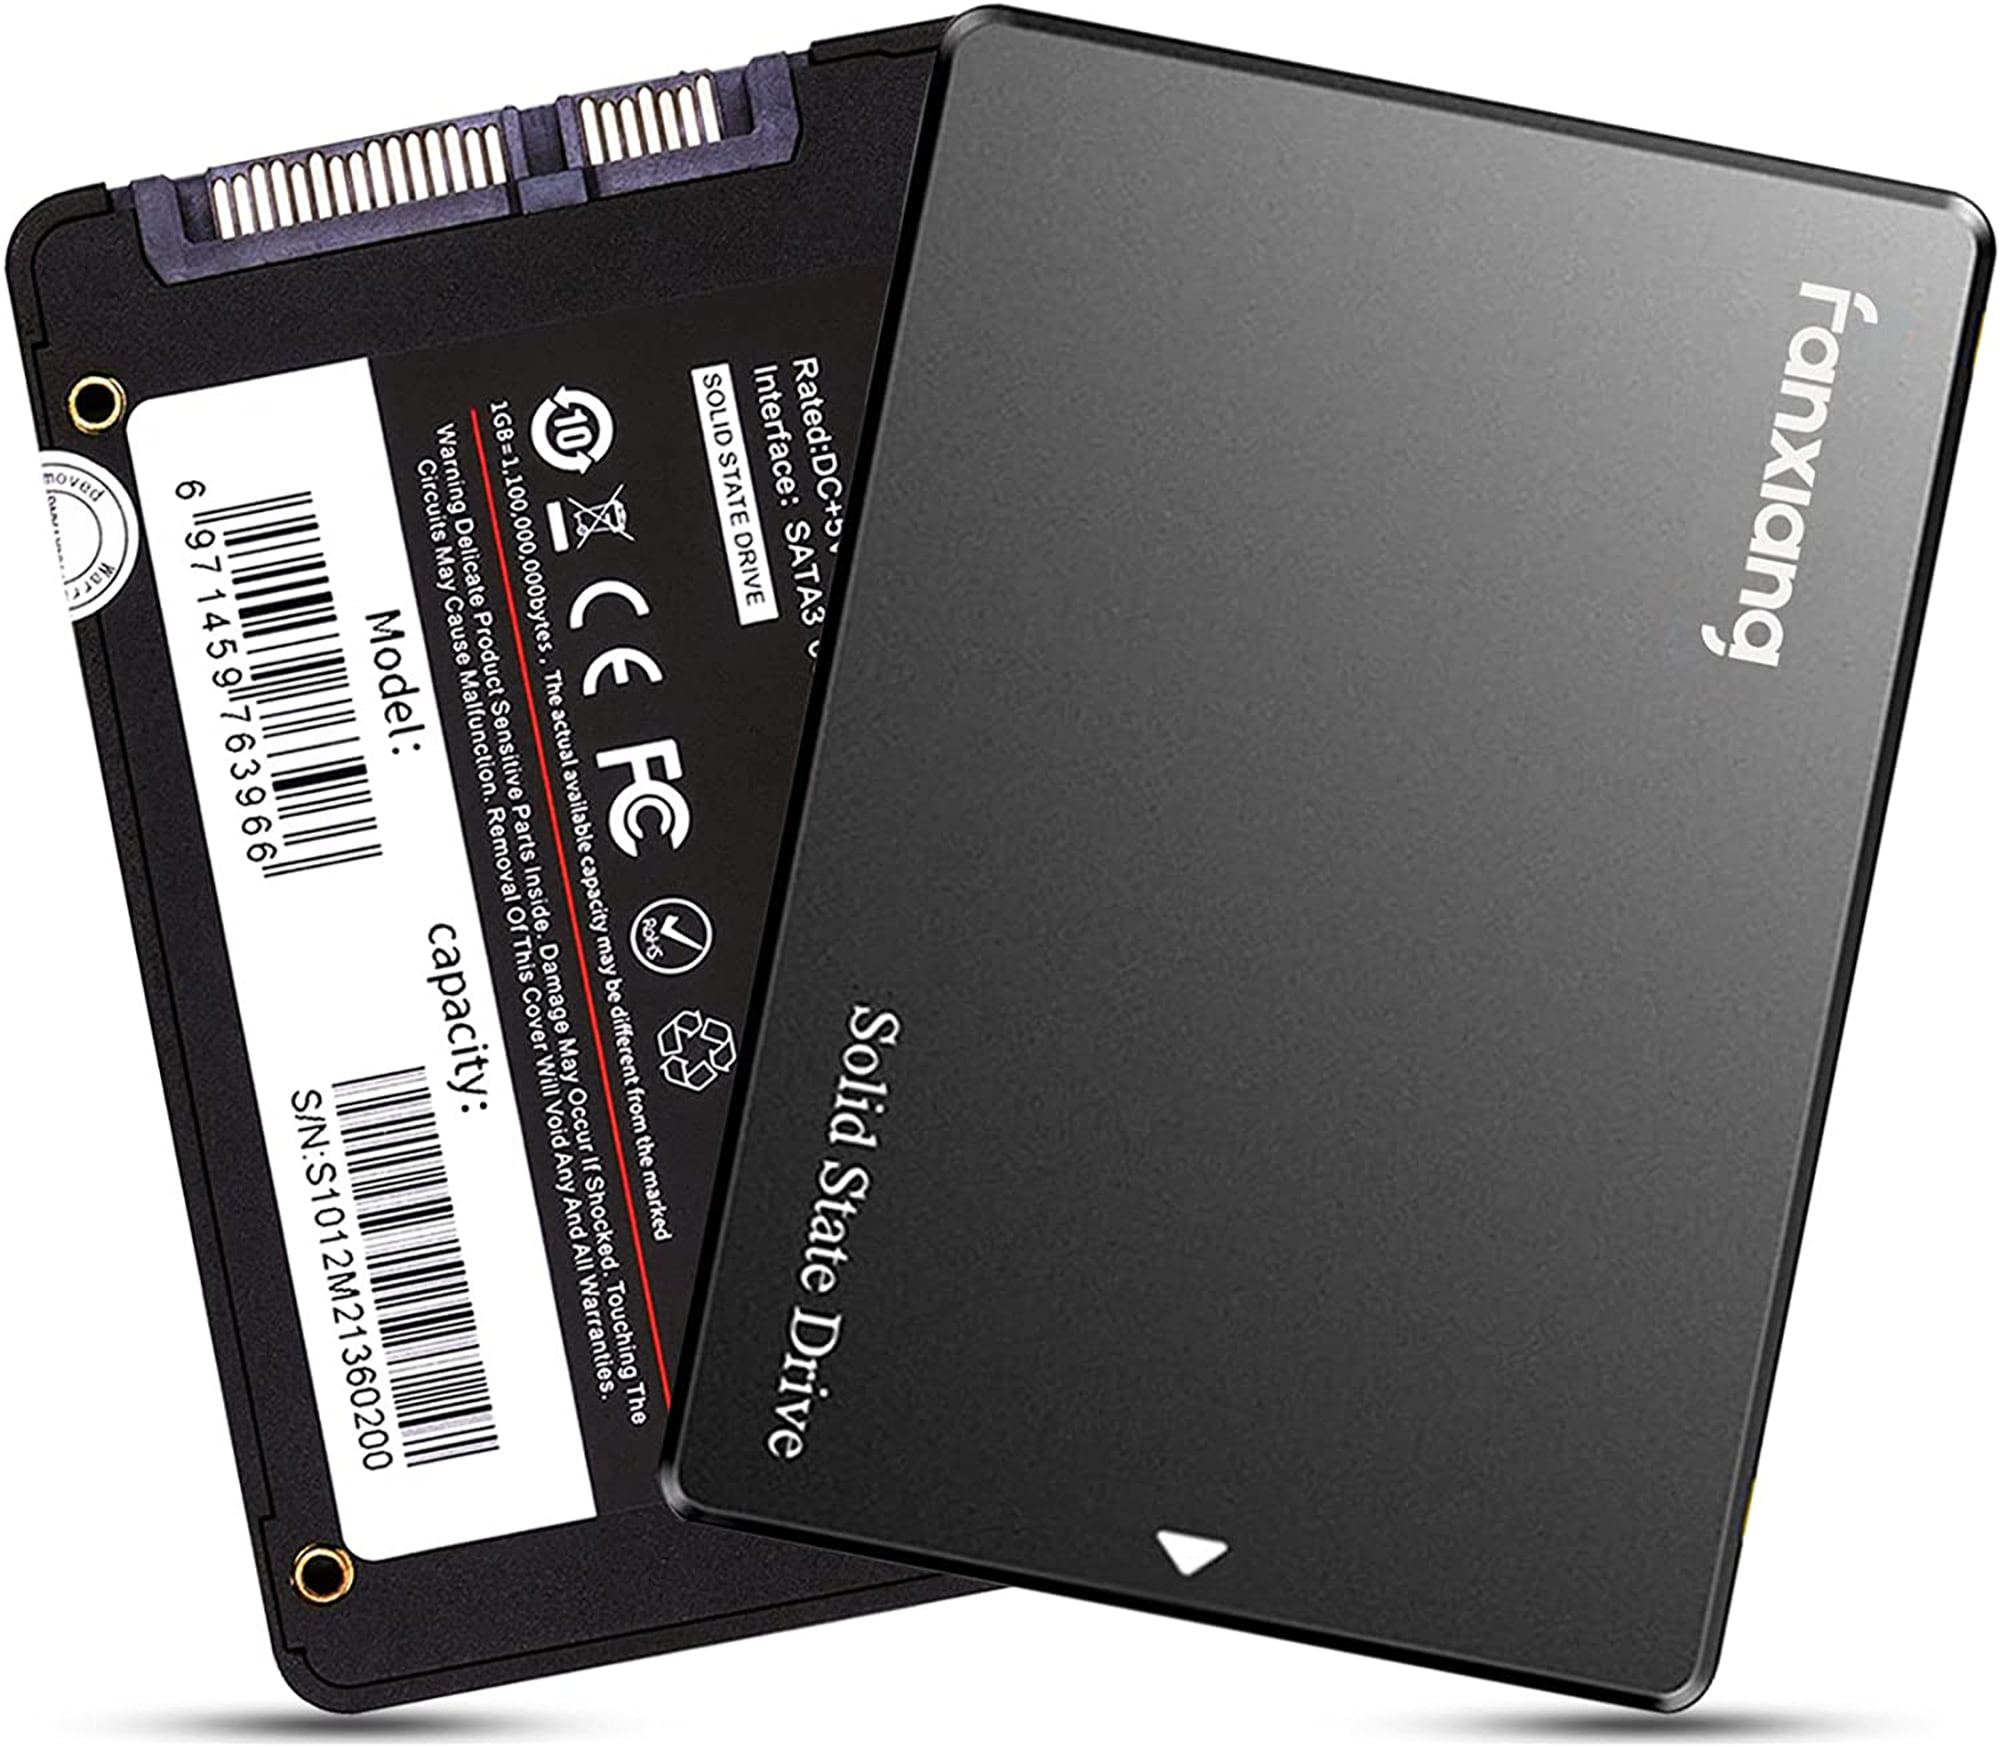 Fanxiang S101 512GB SSD 2.5 inches SATA III Internal Solid State